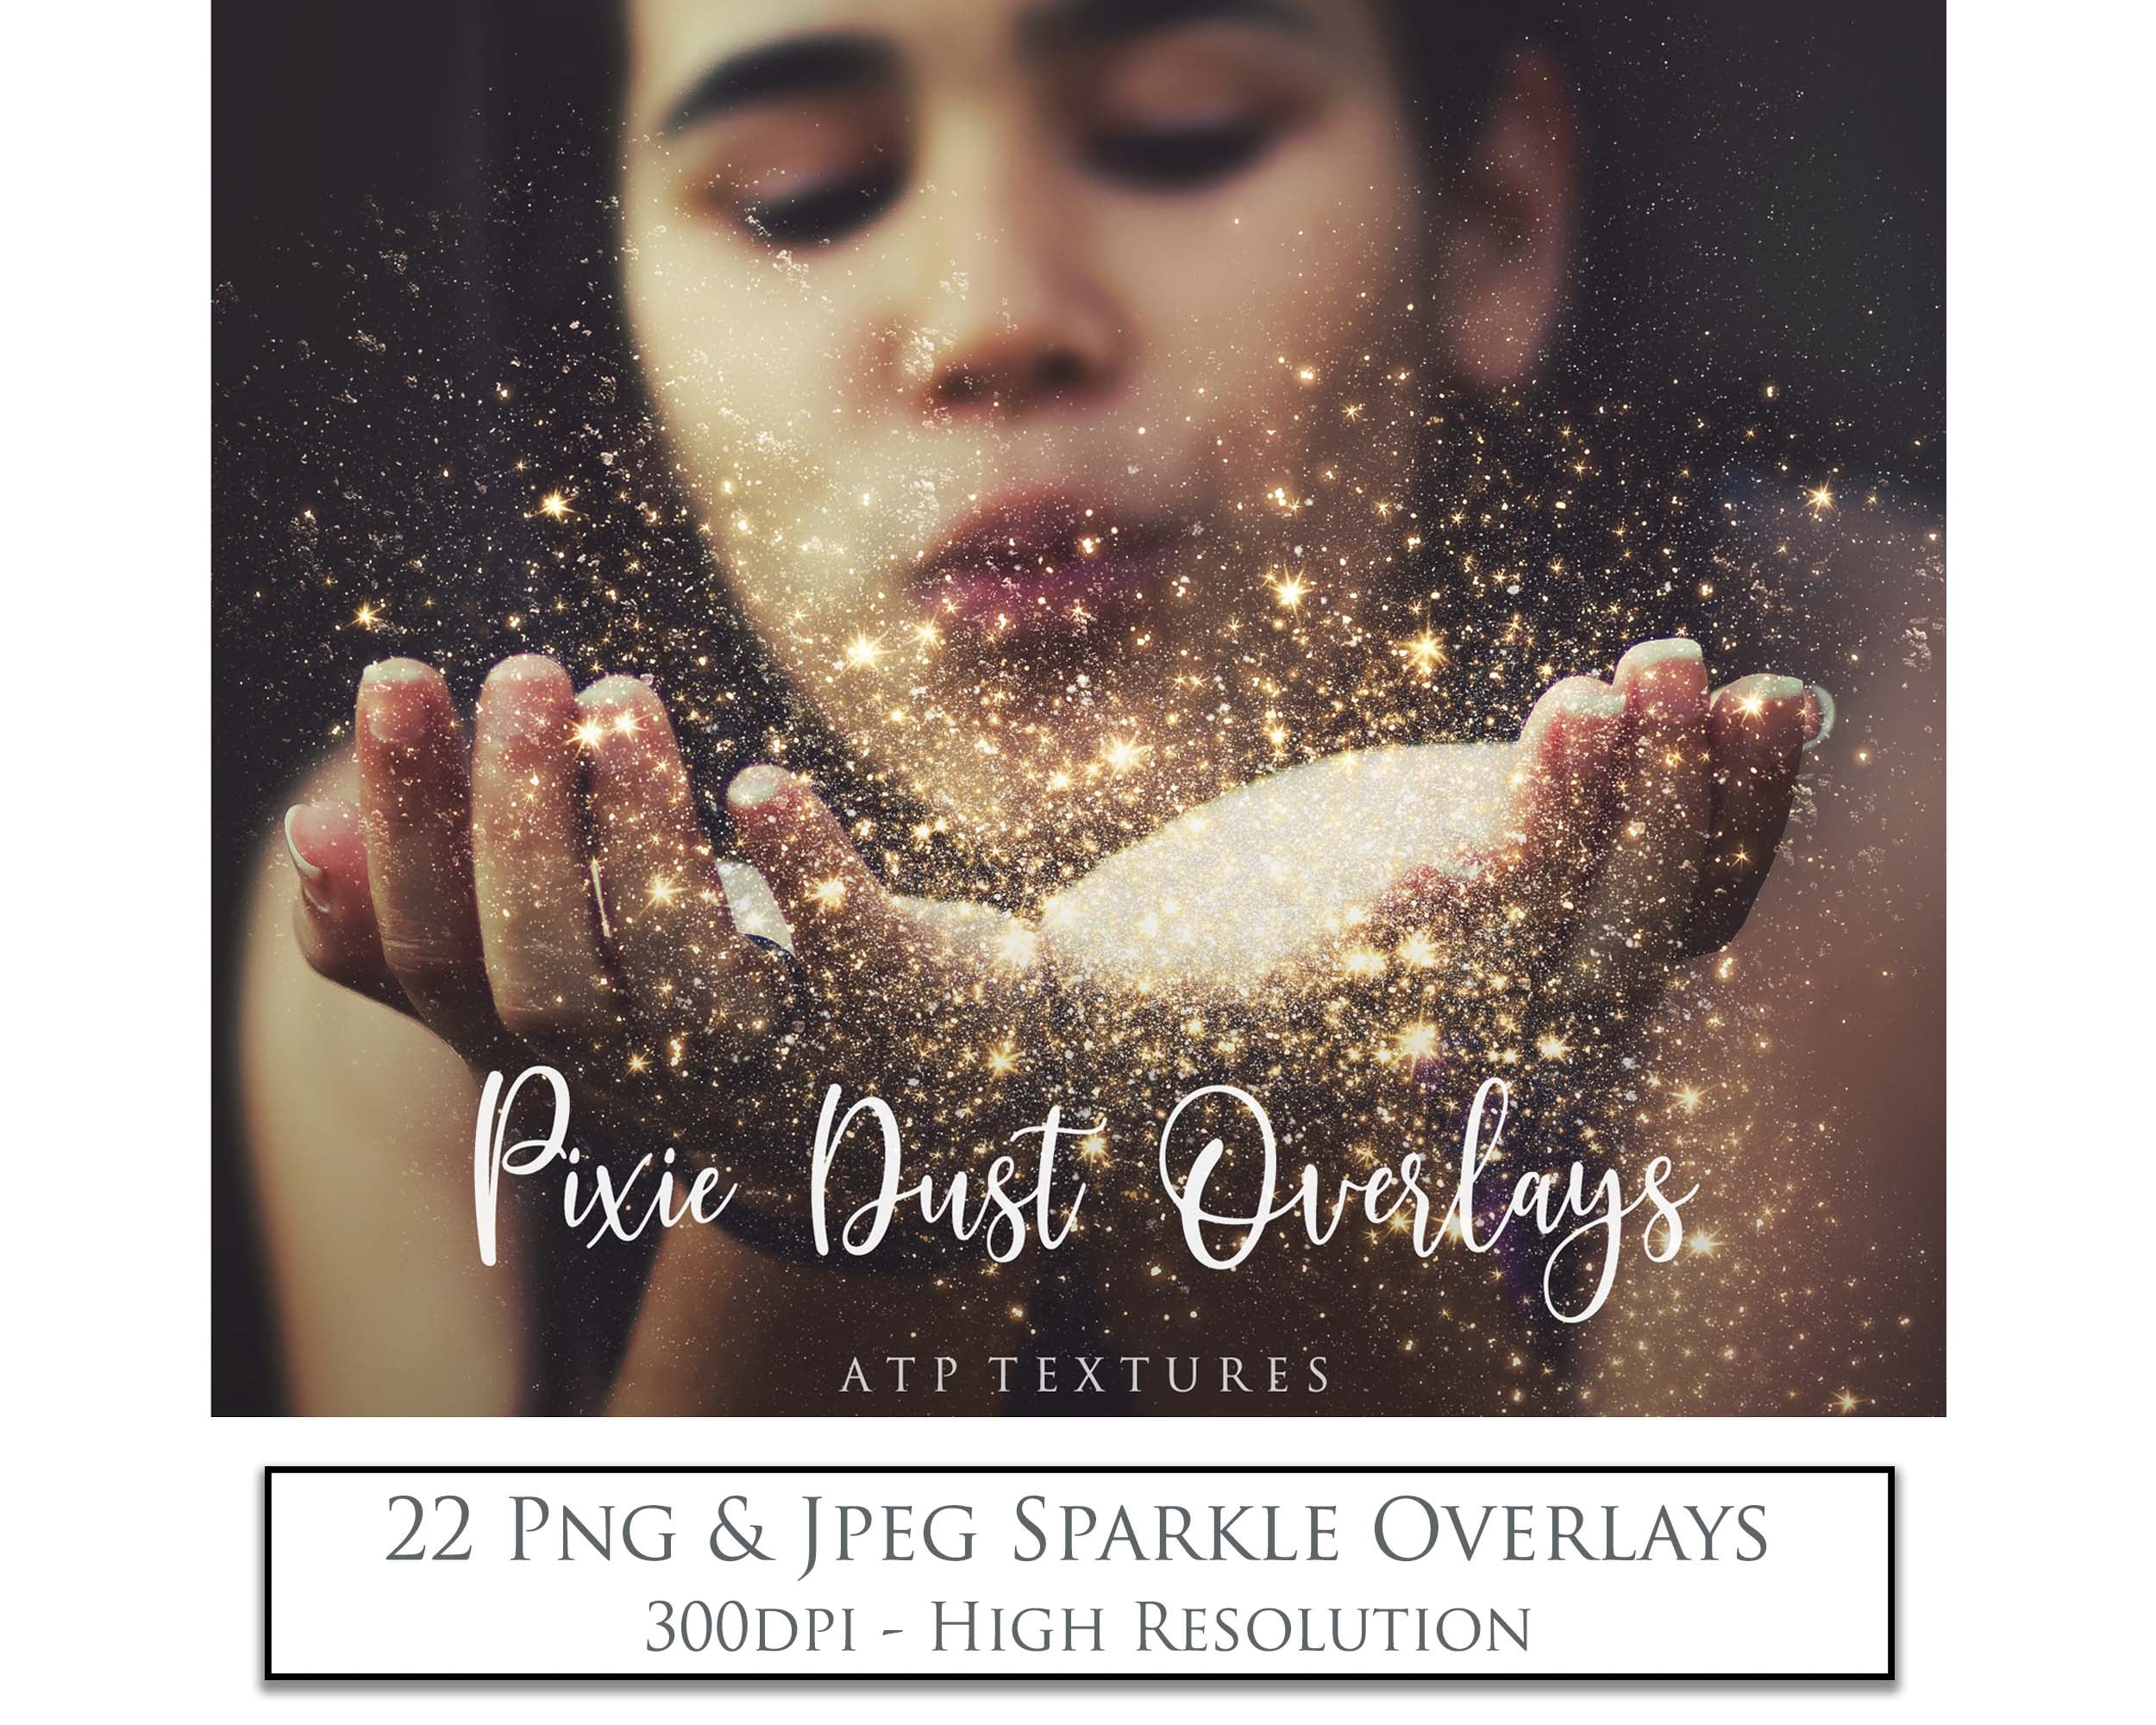 Pixie dust and glows add to photography. Fine Art Overlays for Photographers, Digital Art and Scrapbooking. Photoshop. Fine art realistic. Printable graphic assets. In high resolution, perfect for your next edit or project! Png colourful sparkles. Sublimation art. ATP Textures